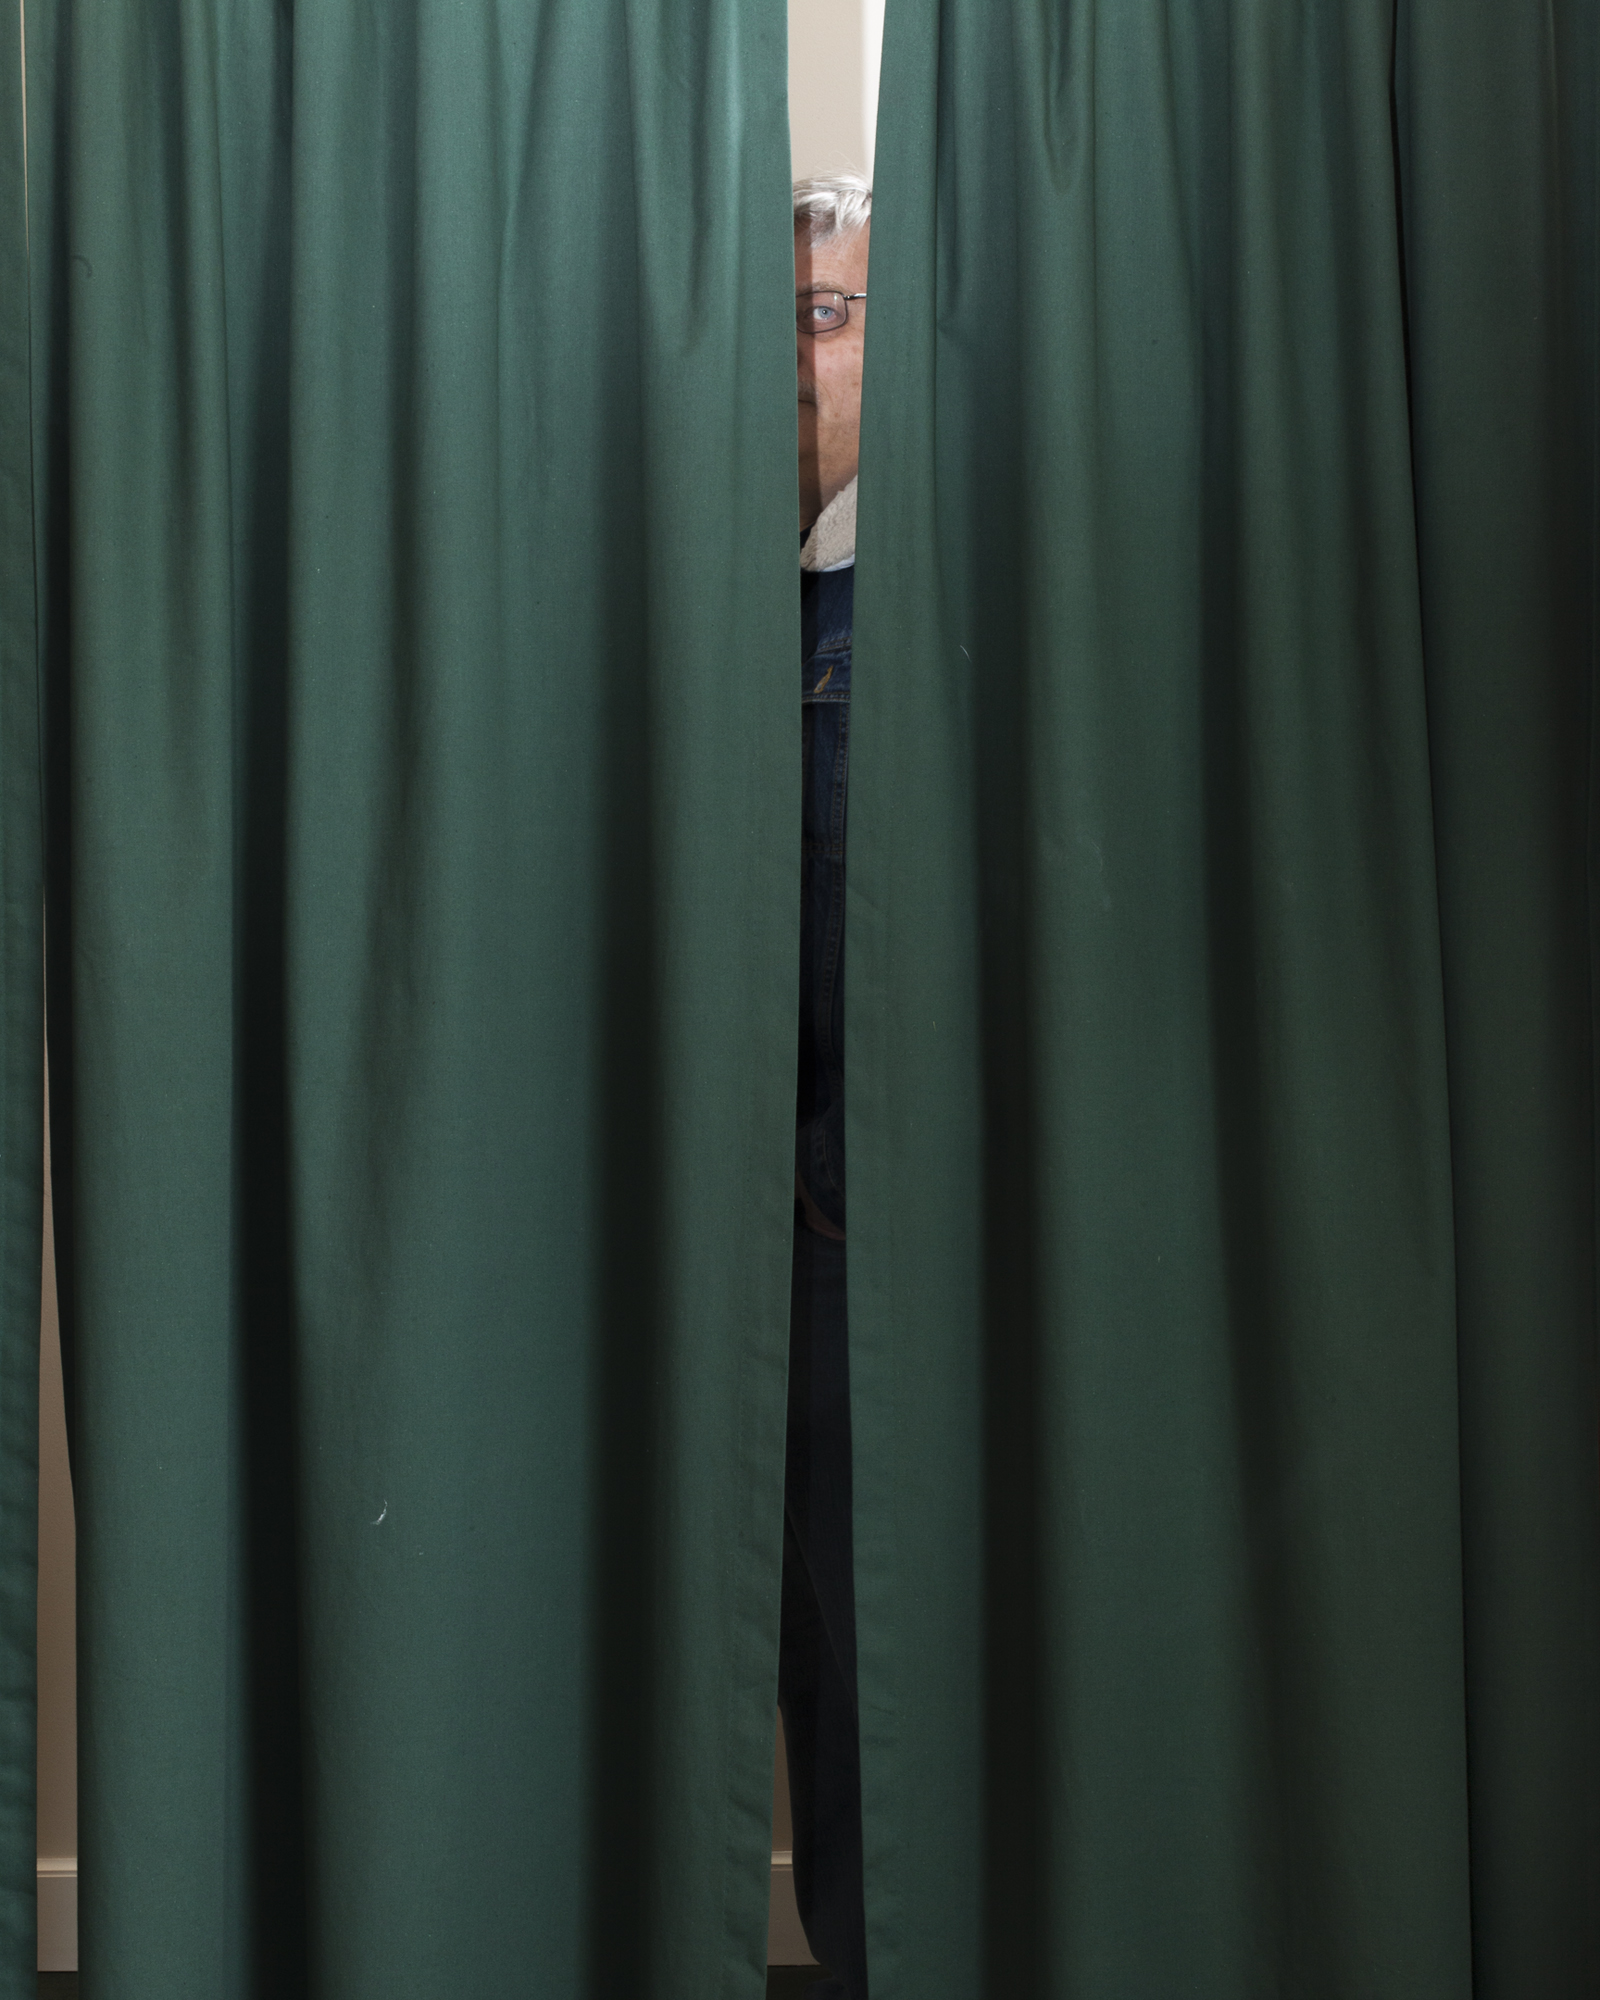  Dad Behind the Curtain, 2014 